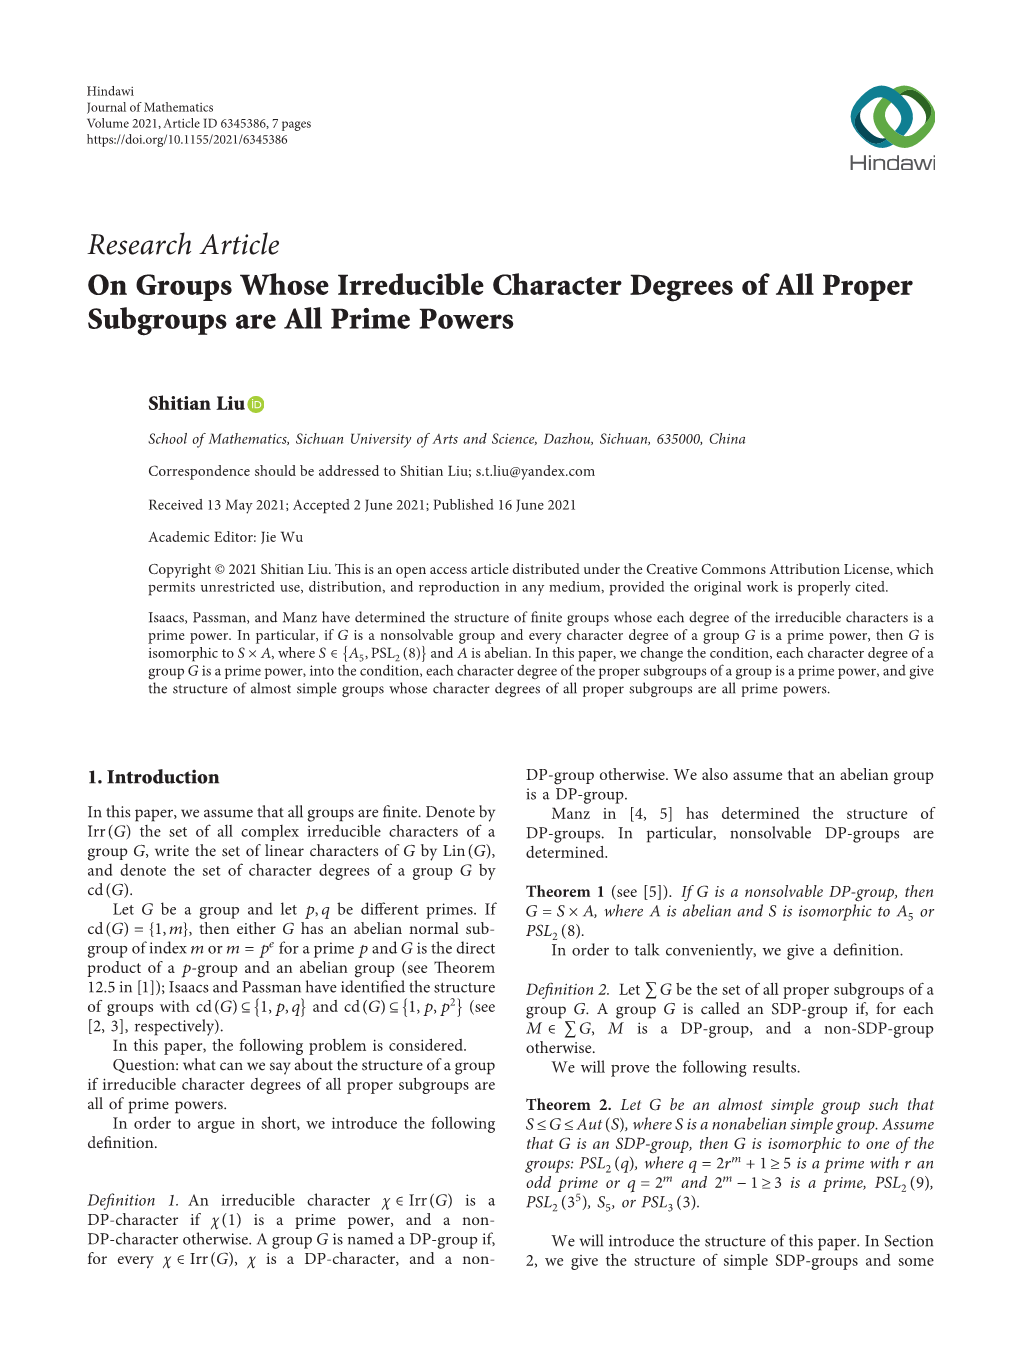 Research Article on Groups Whose Irreducible Character Degrees of All Proper Subgroups Are All Prime Powers